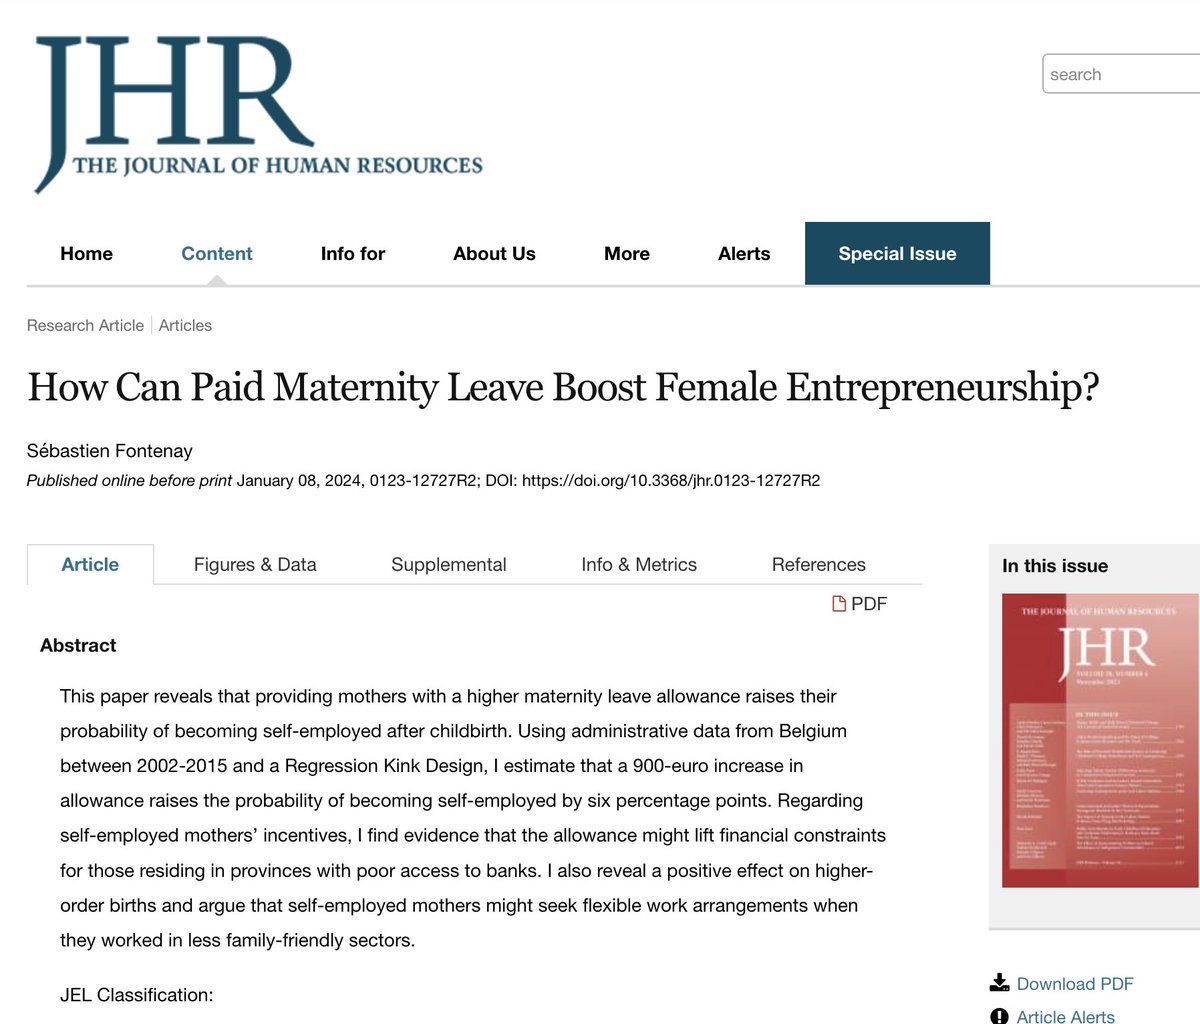 Paid maternity leave boosts female entrepreneurship jhr.uwpress.org/content/early/…